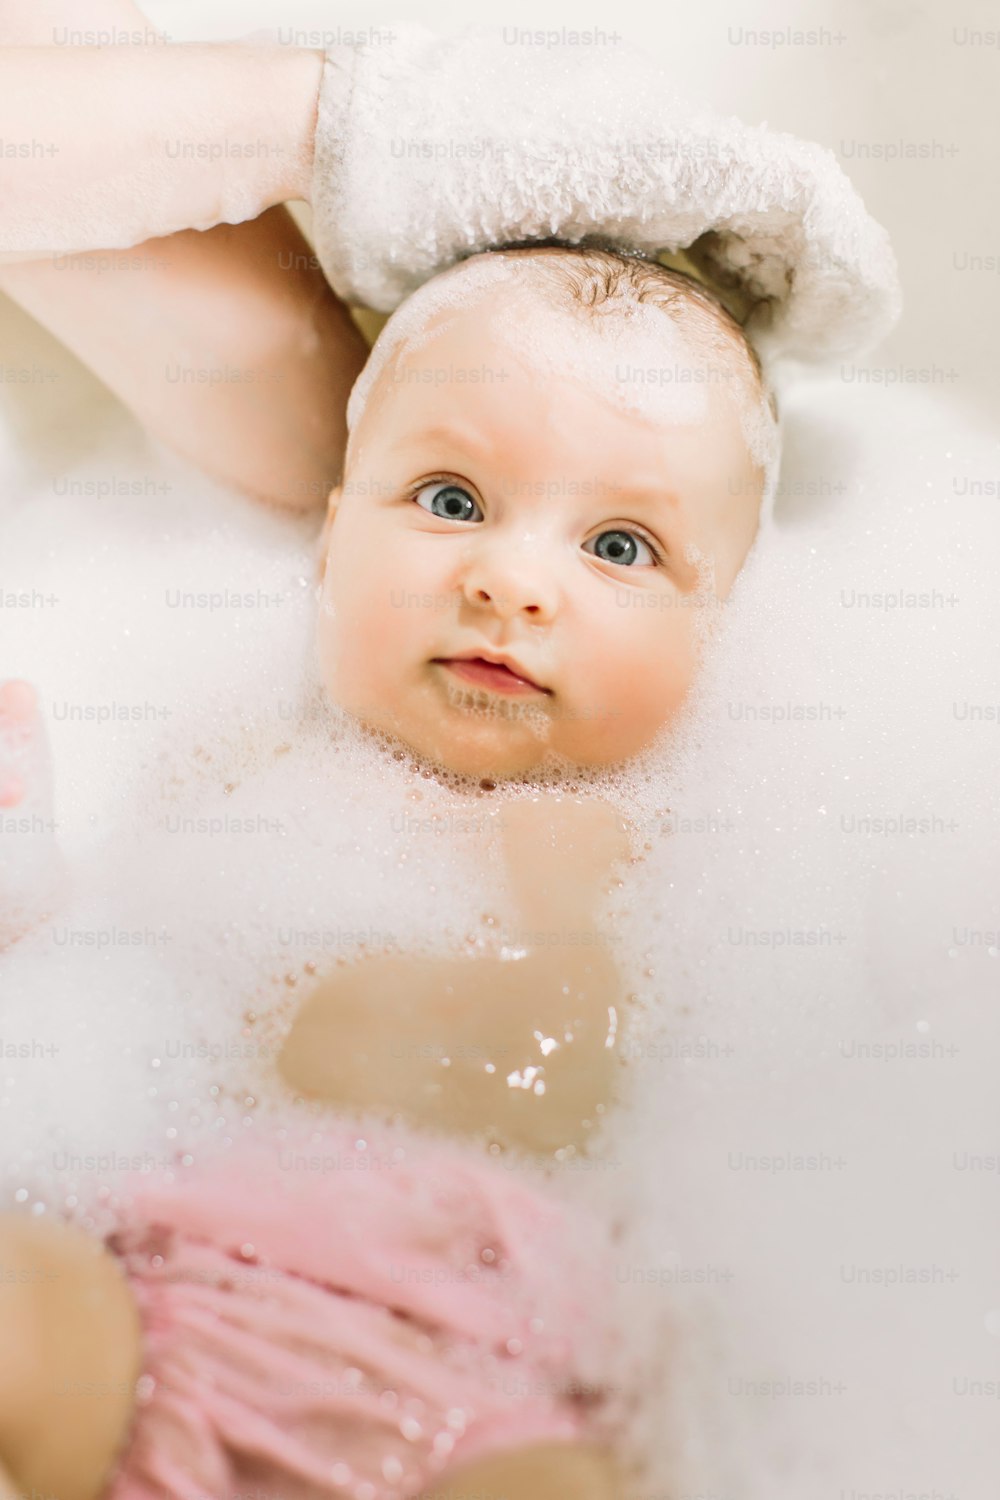 Happy laughing baby taking a bath playing with foam bubbles. Little child in a bathtub. Infant washing and bathing. Hygiene and care for young children. Adorable bath baby with soap suds on hair